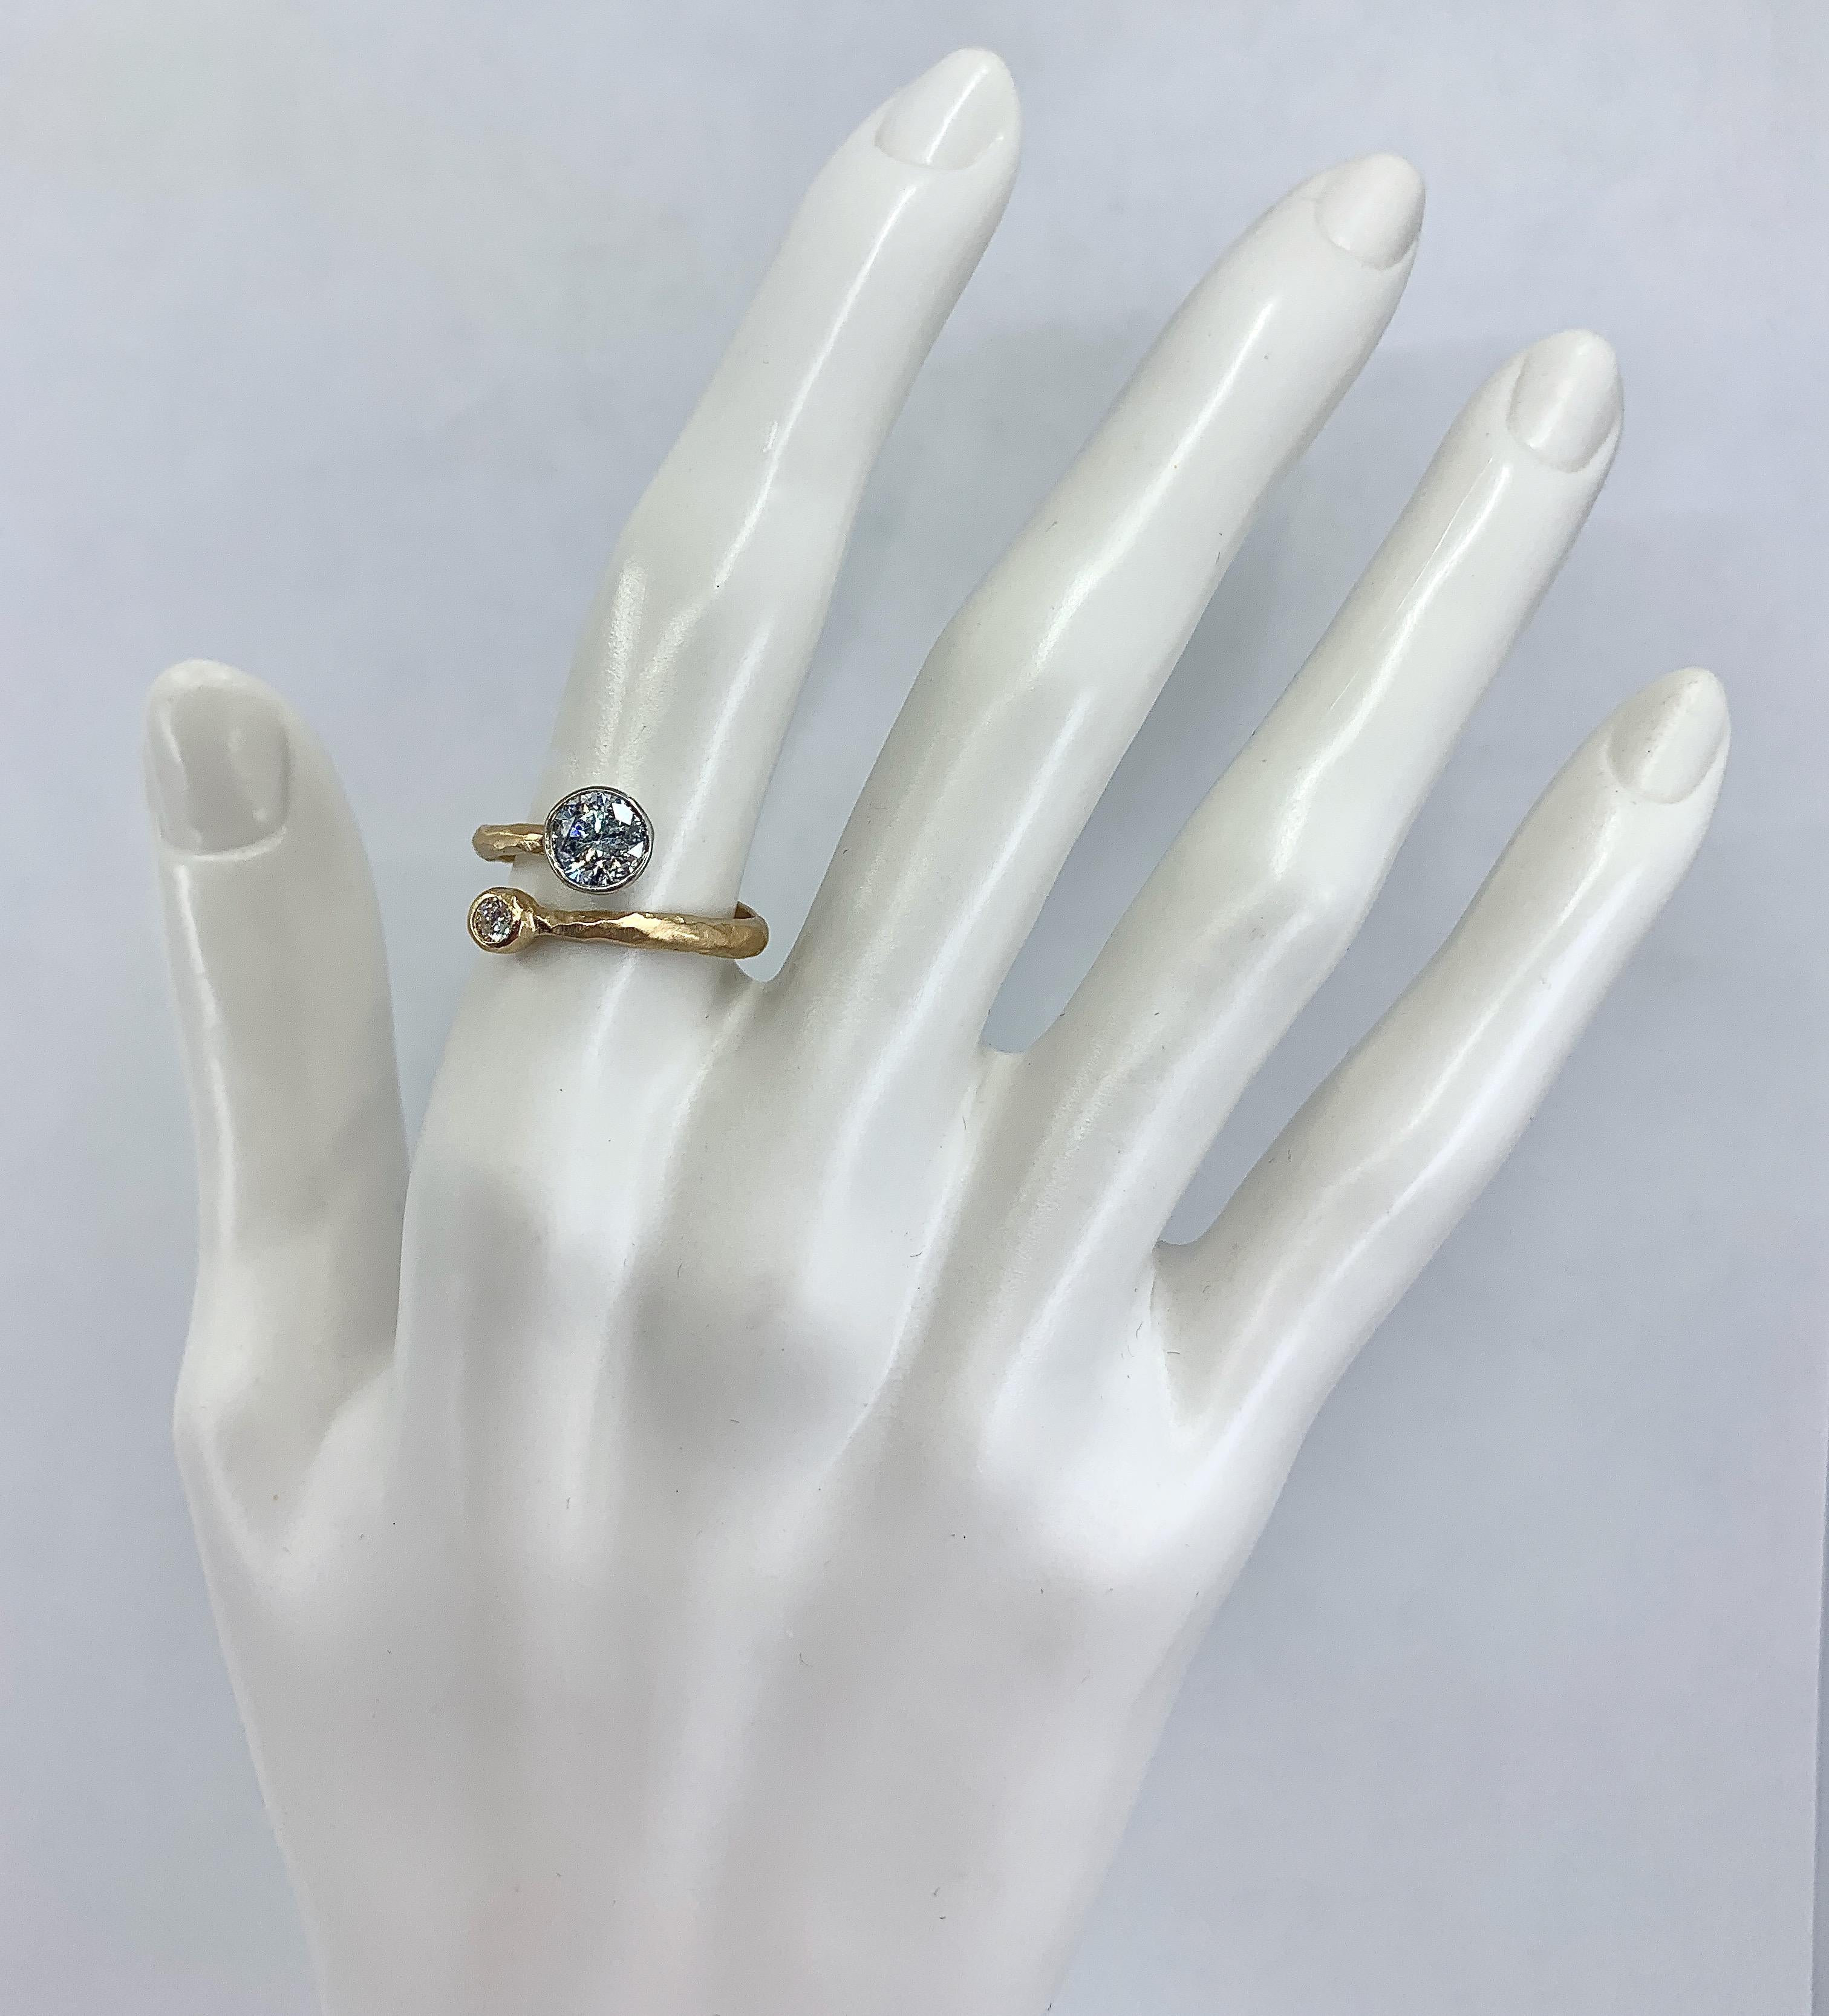 This quirky, eye-catching bypass ring by Eytan Brandes features one large and one small diamond set in a band of hammered and brushed 18 karat gold.  The large diamond is very low clarity (SI3).  However, it's so included -- you can see spots of